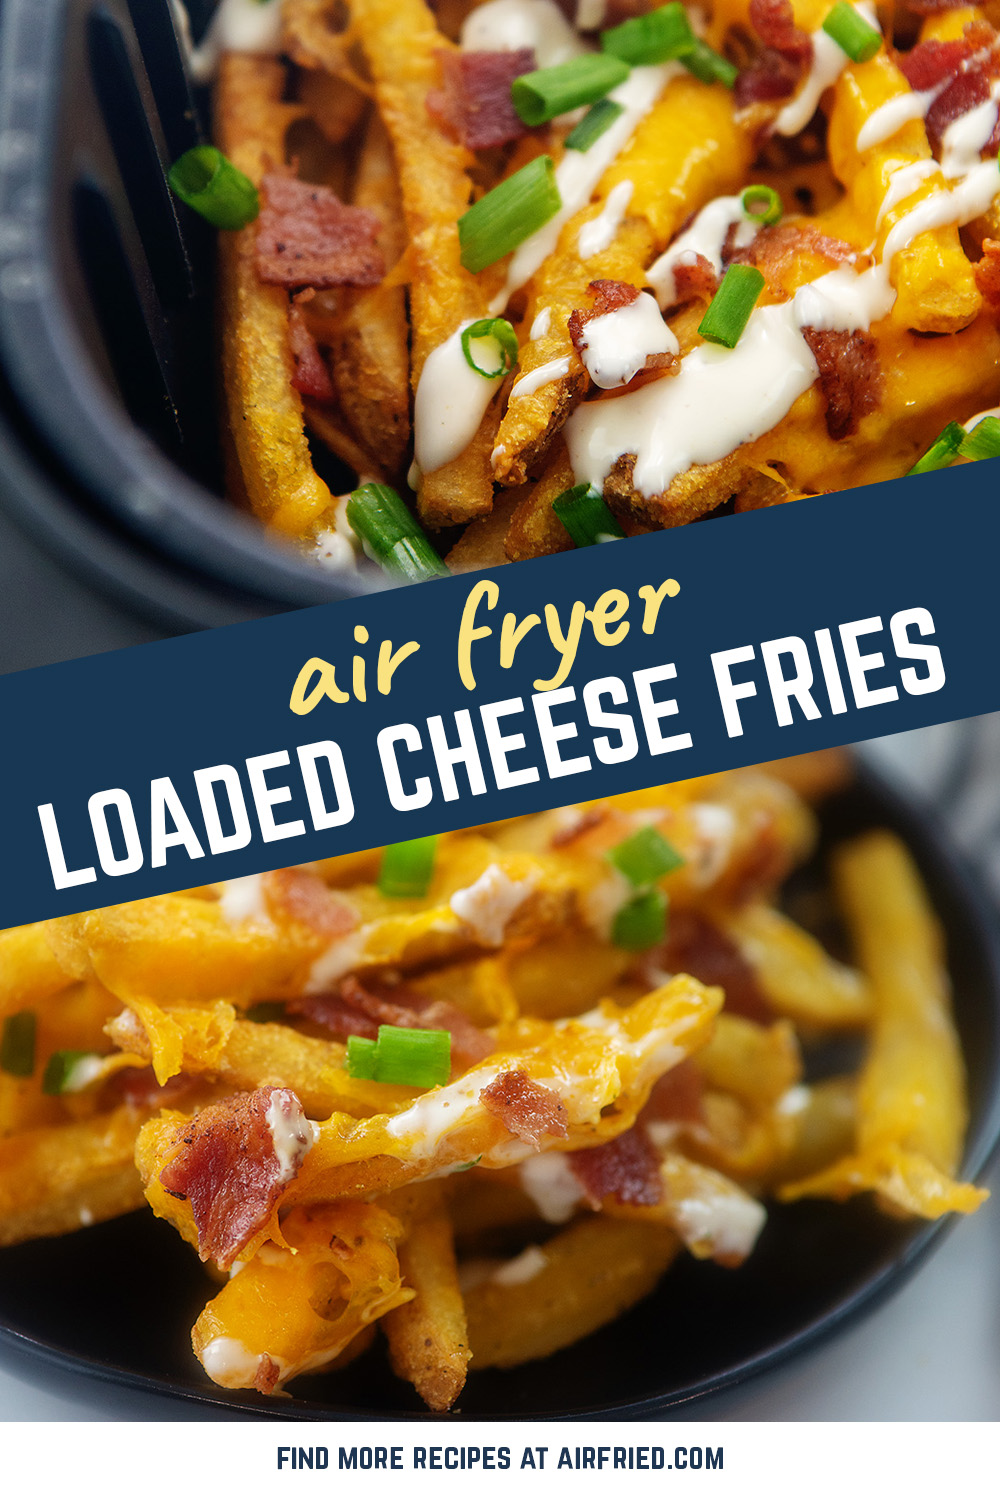 These air fried French fries are loaded with cheese, bacon, and ranch dressing!  They are a fantastic snack or appetizer!